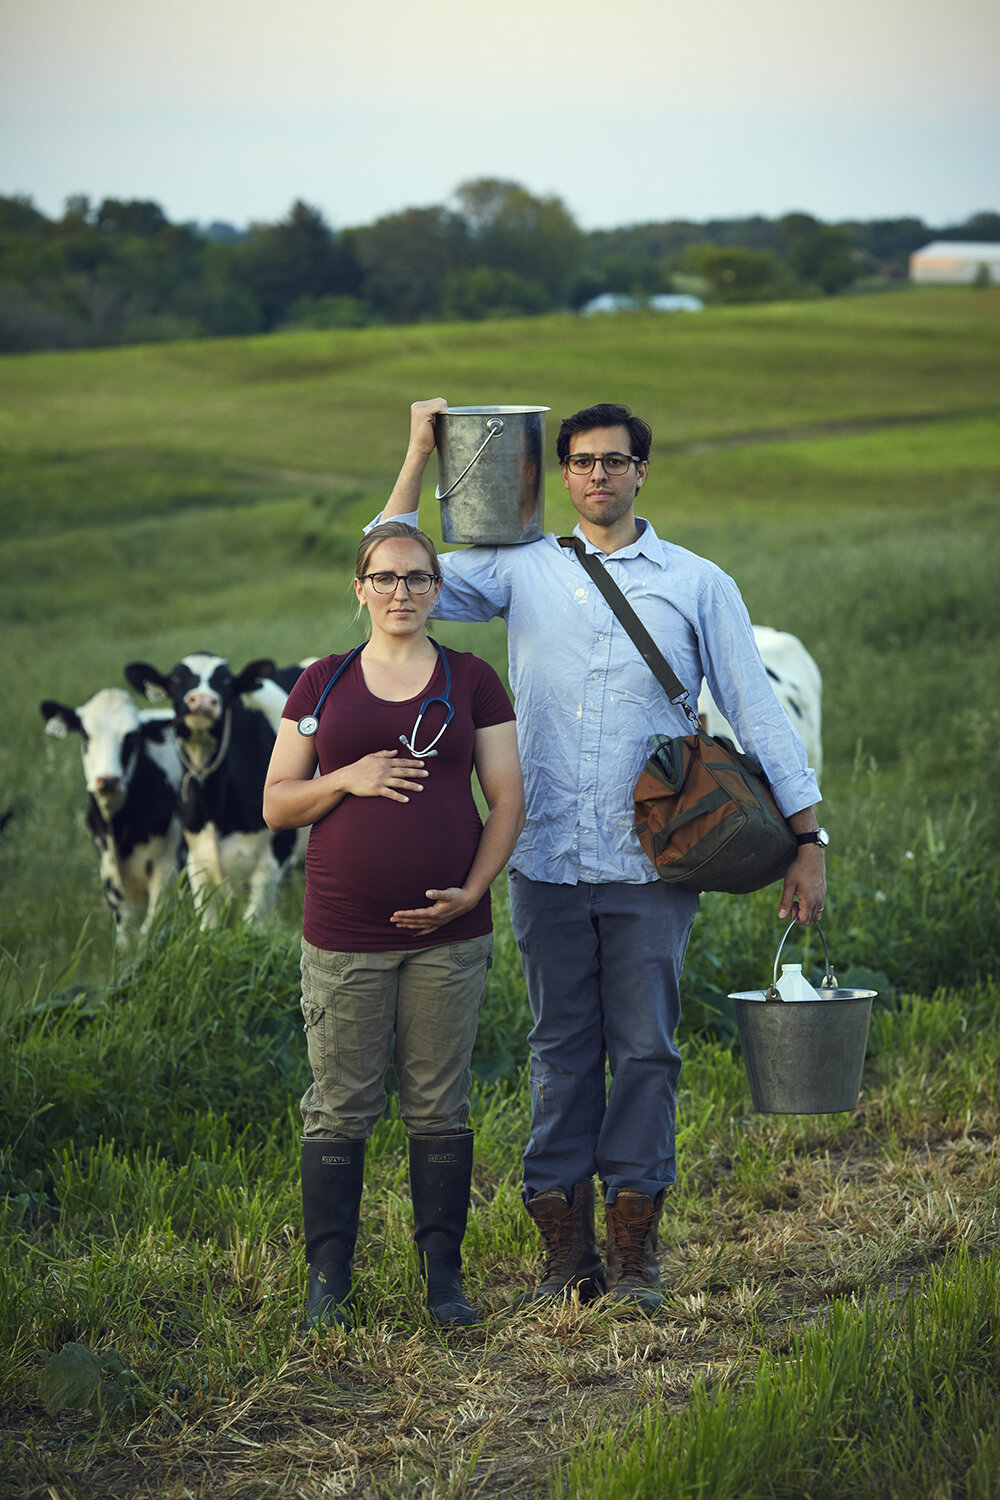 american gothic inspired maternity portrait of livestock vet in a field with cows by creative portrait photographer Hanna Agar